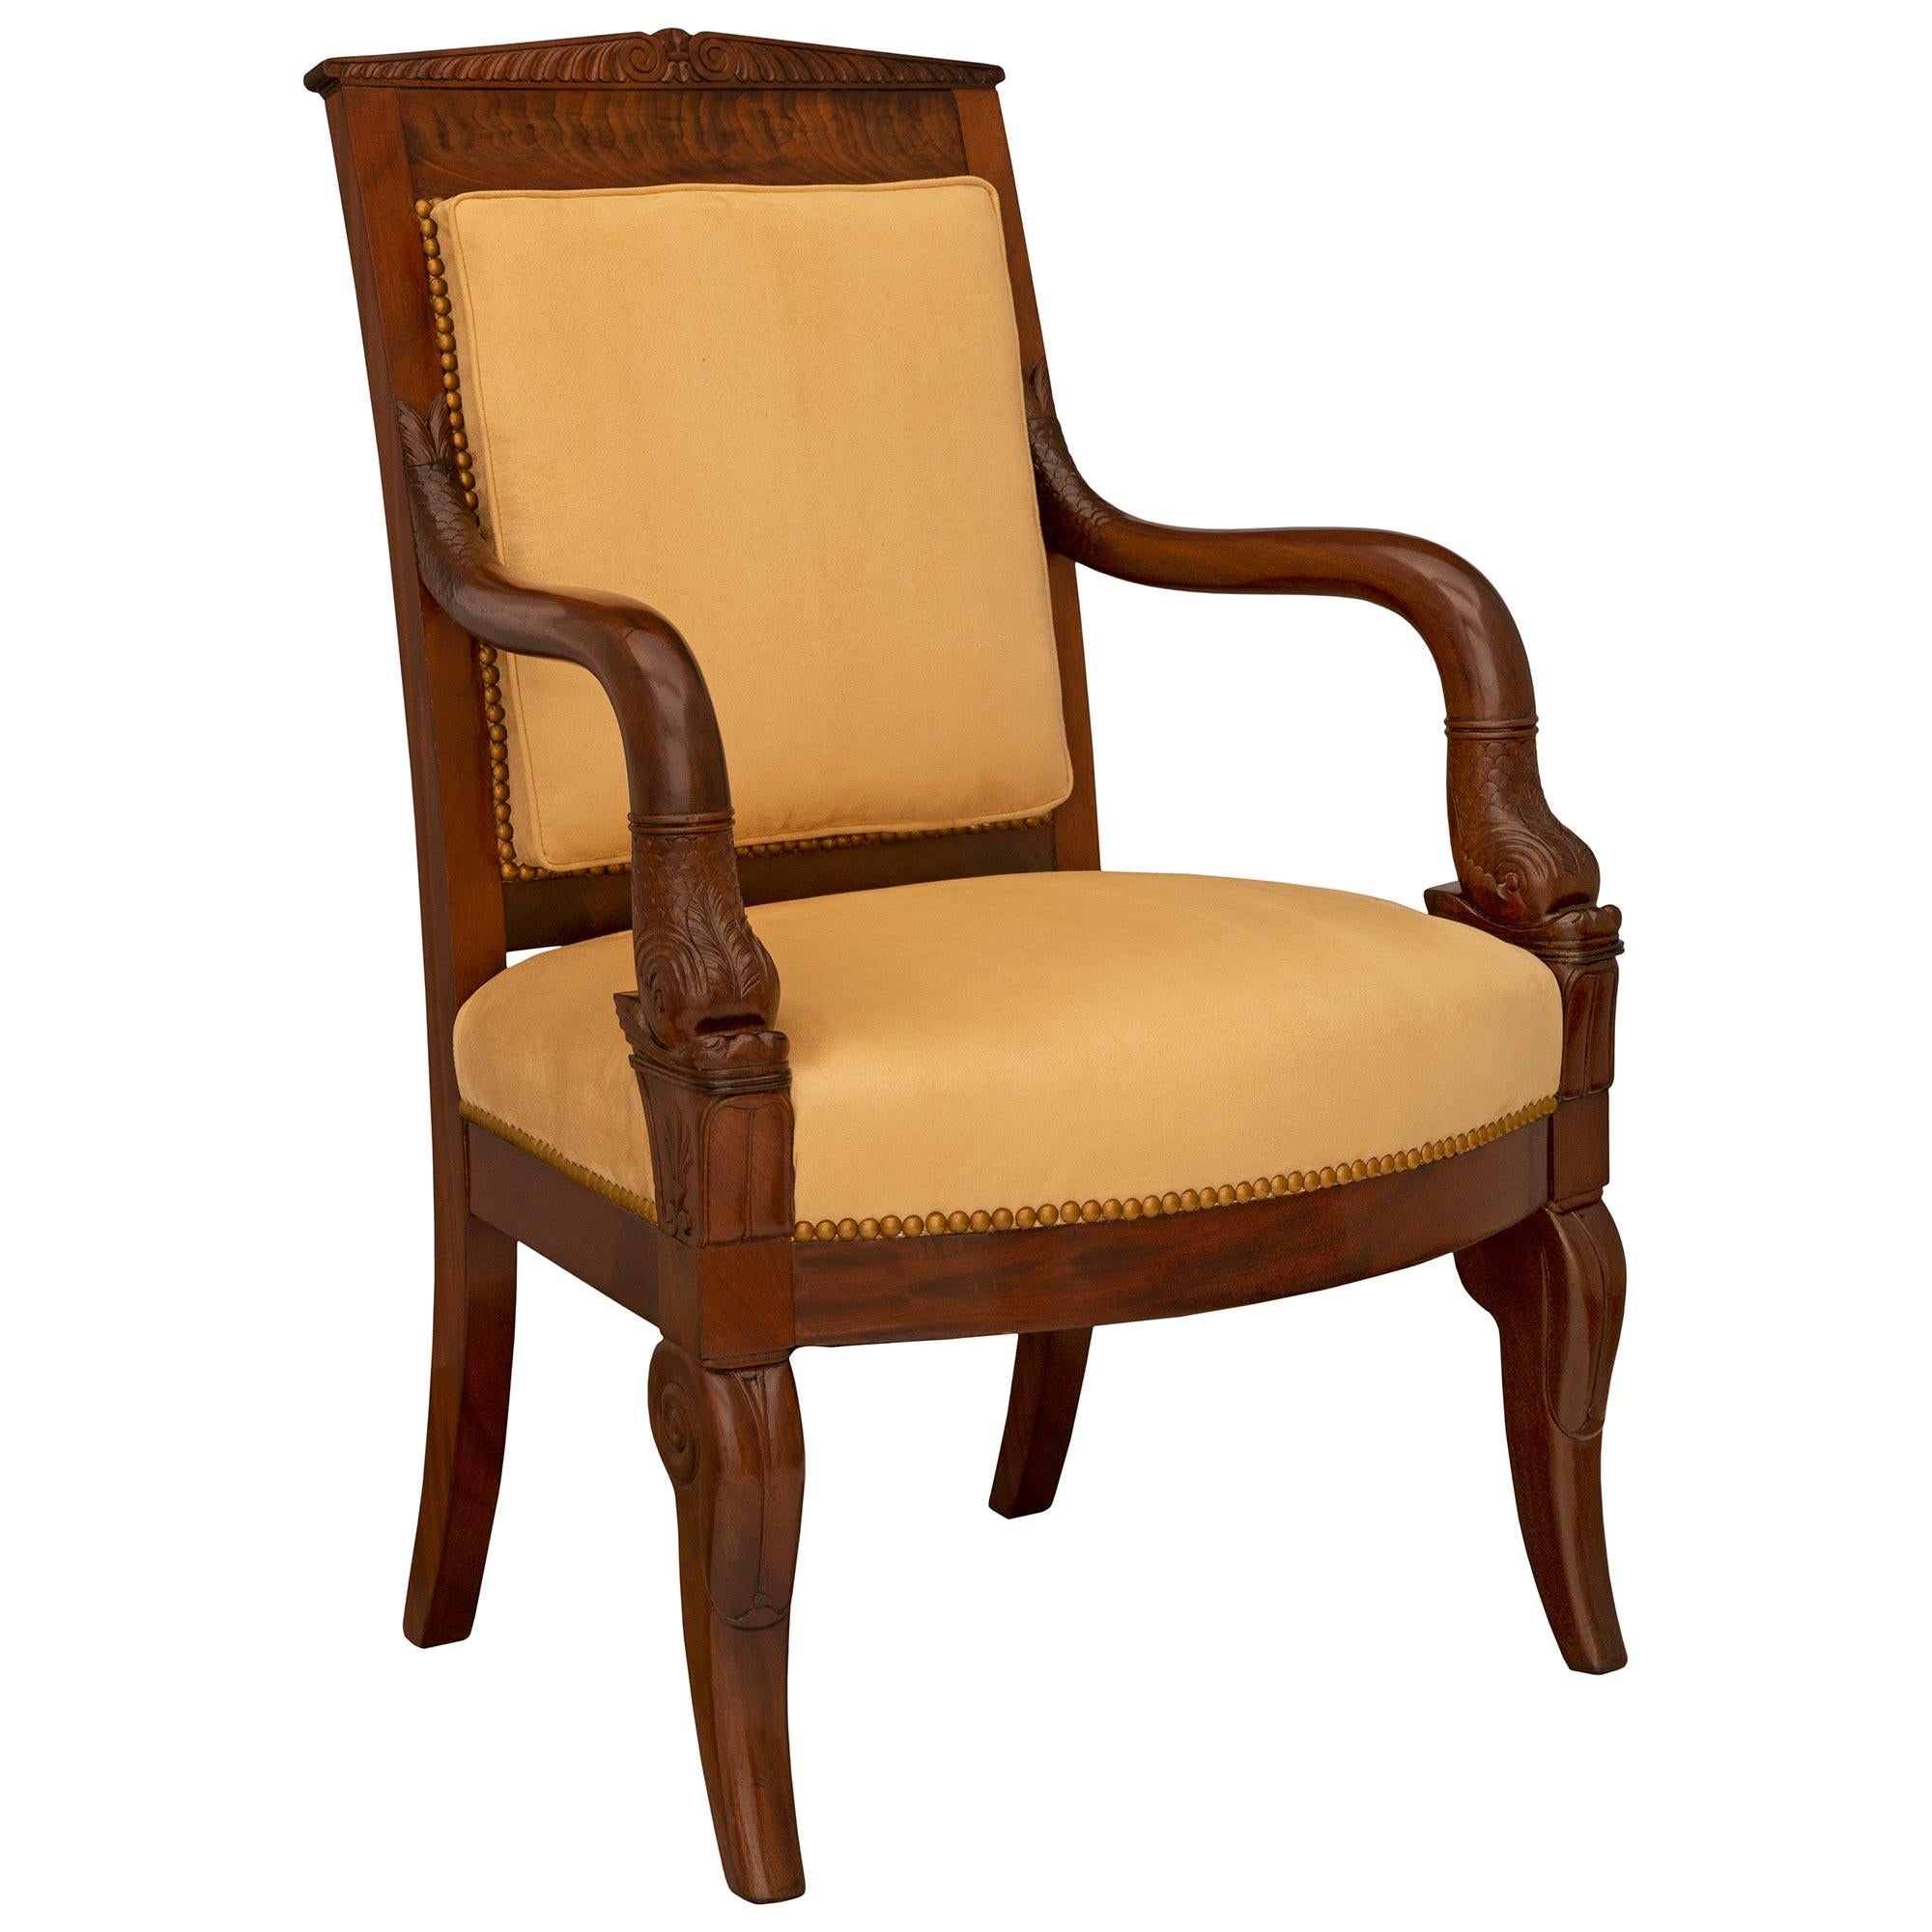 A beautiful French 19th century Empire st. flamed Mahogany desk armchair. The armchair is raised by stout elegantly scrolled legs with fine carved designs at the front and lightly curved square legs at the back. Each arm displays exquisite finely